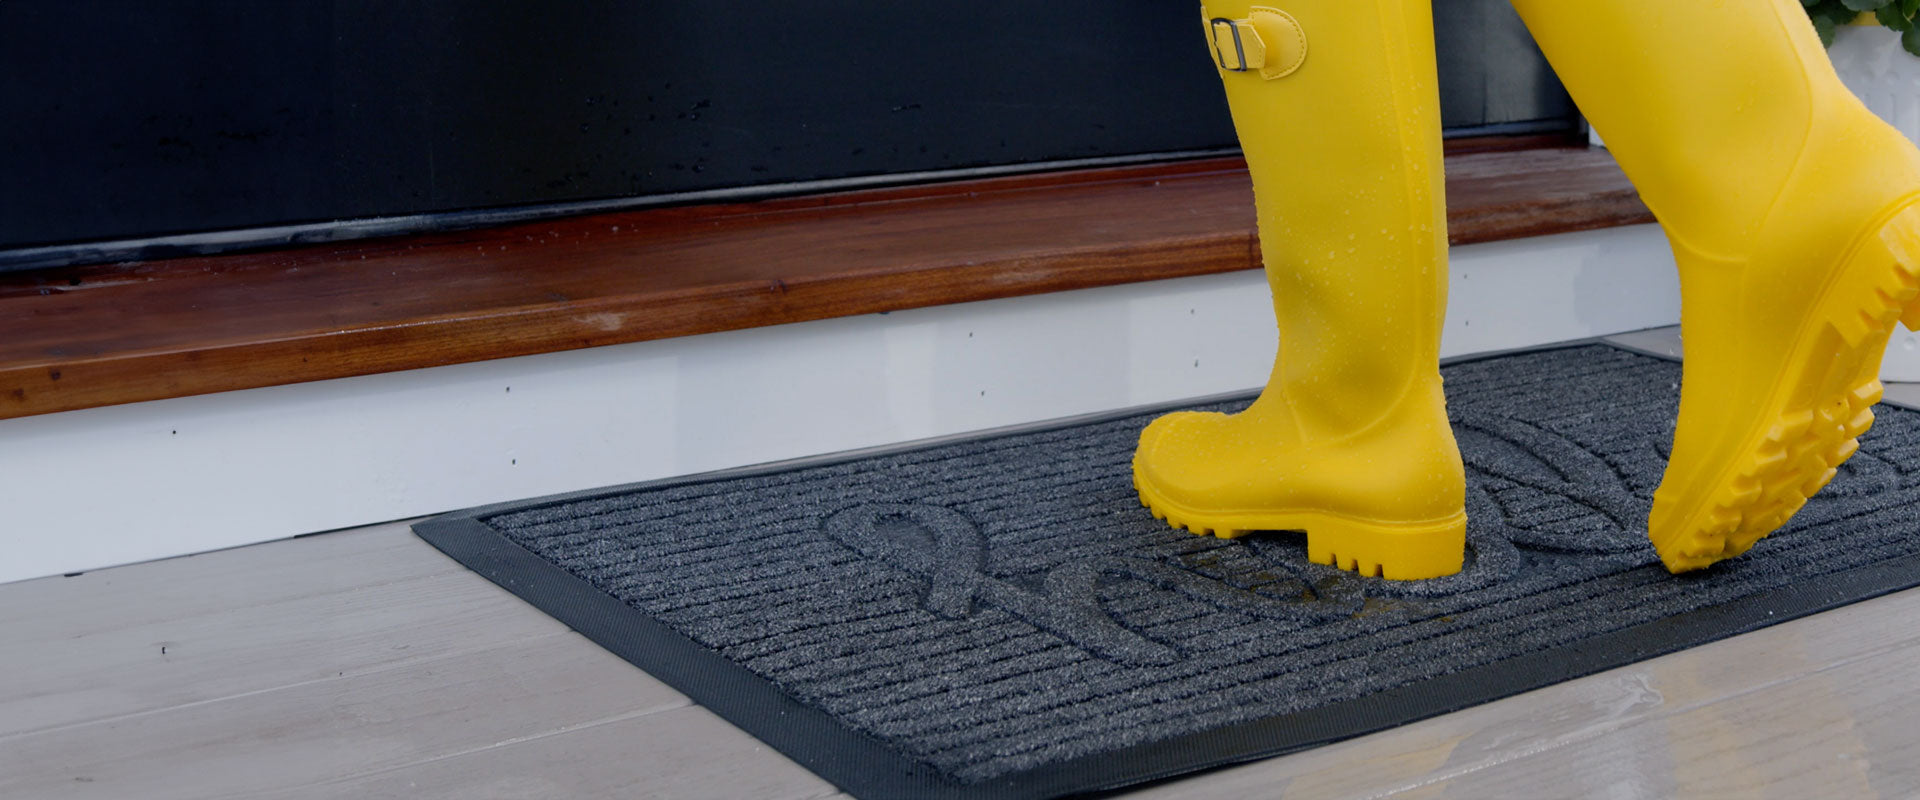 Yellow boots on a Gorilla Grip doormat ensure no tracked-in mud